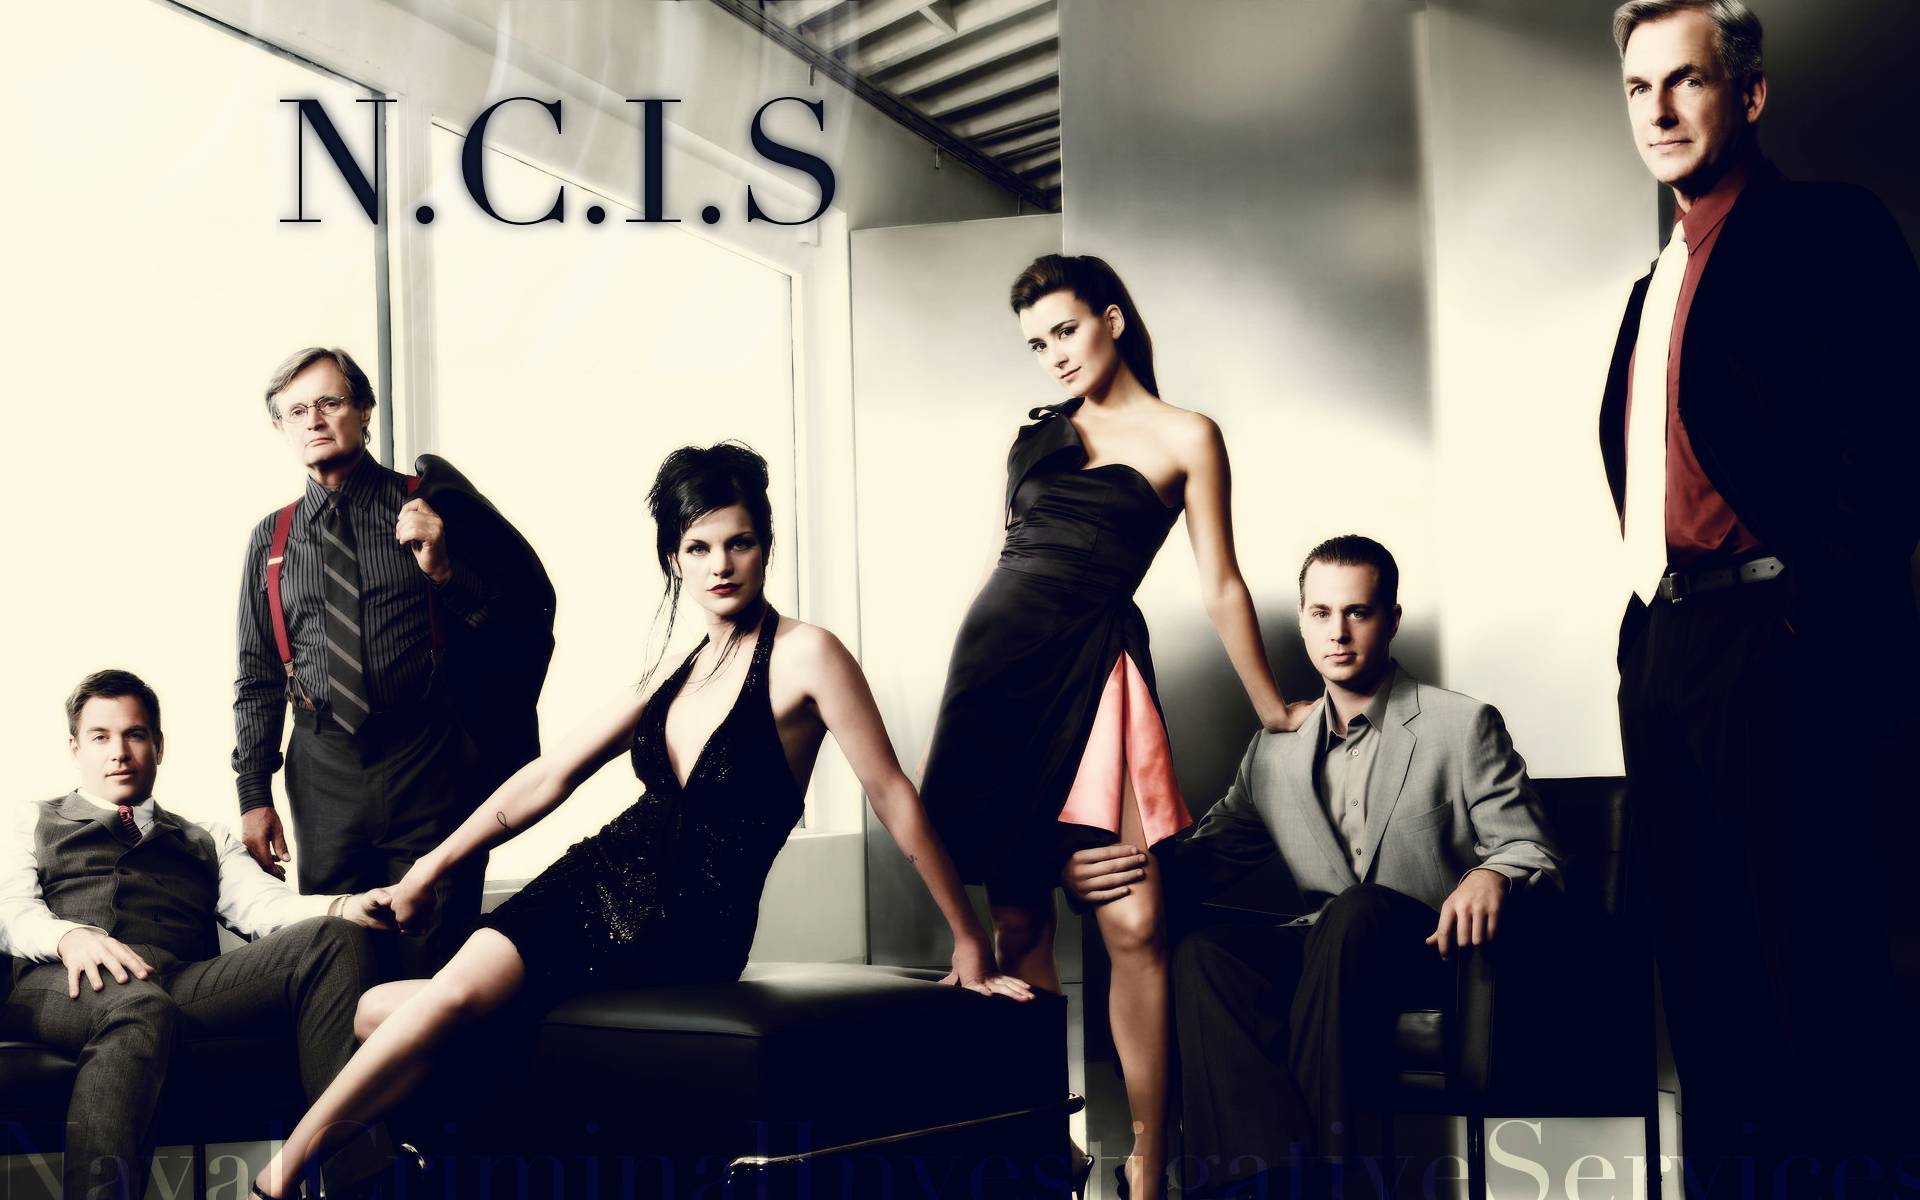 Ncis Wallpapers Top Free Ncis Backgrounds Wallpaperaccess Images, Photos, Reviews